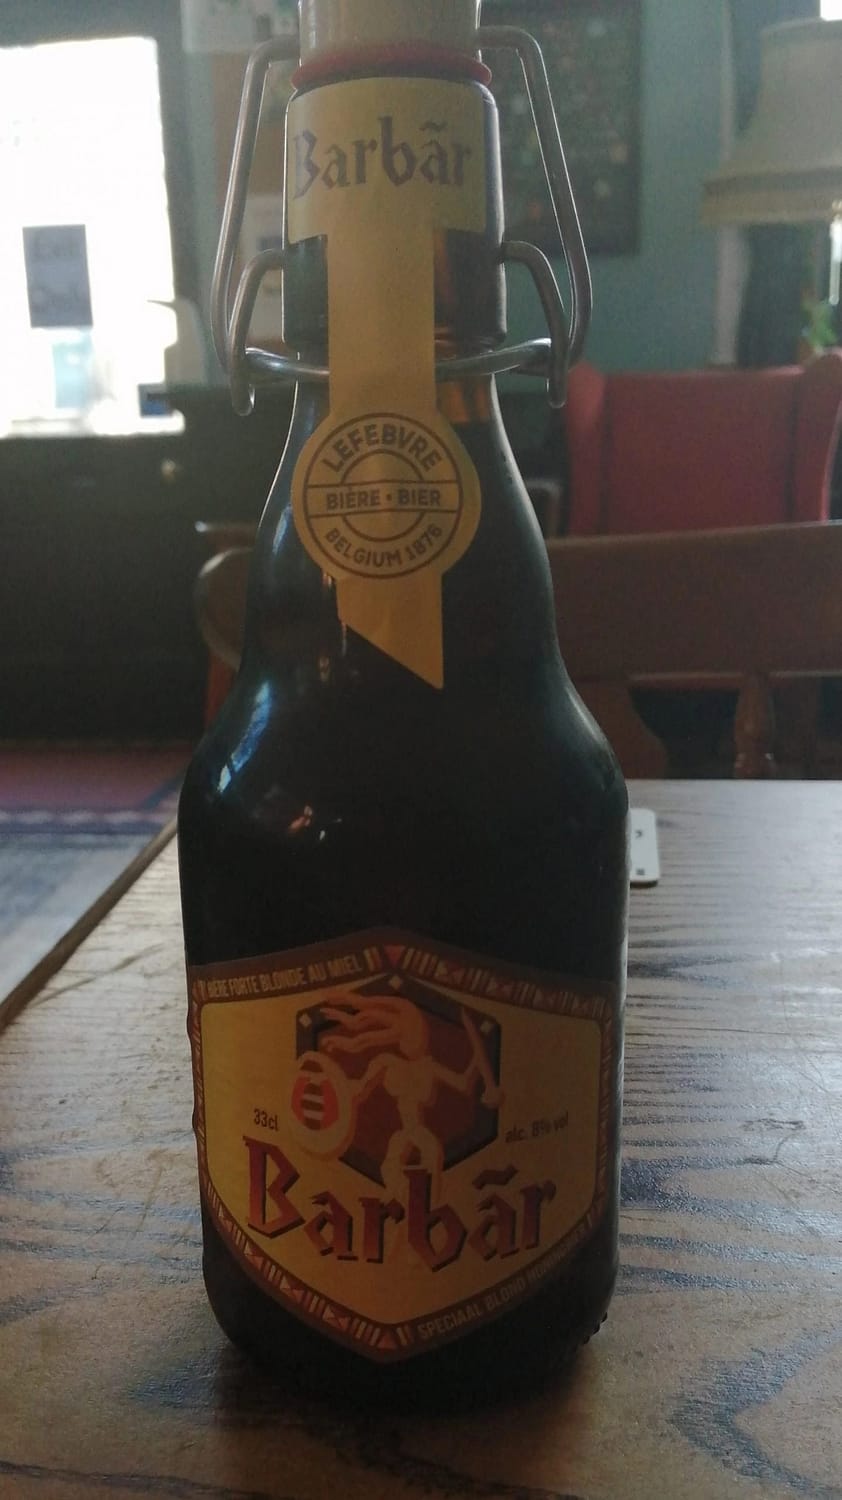 Dark brown stubby bottle with flip-top lid on a wooden table; yellow label depicts a stylised warrior with shield and spear